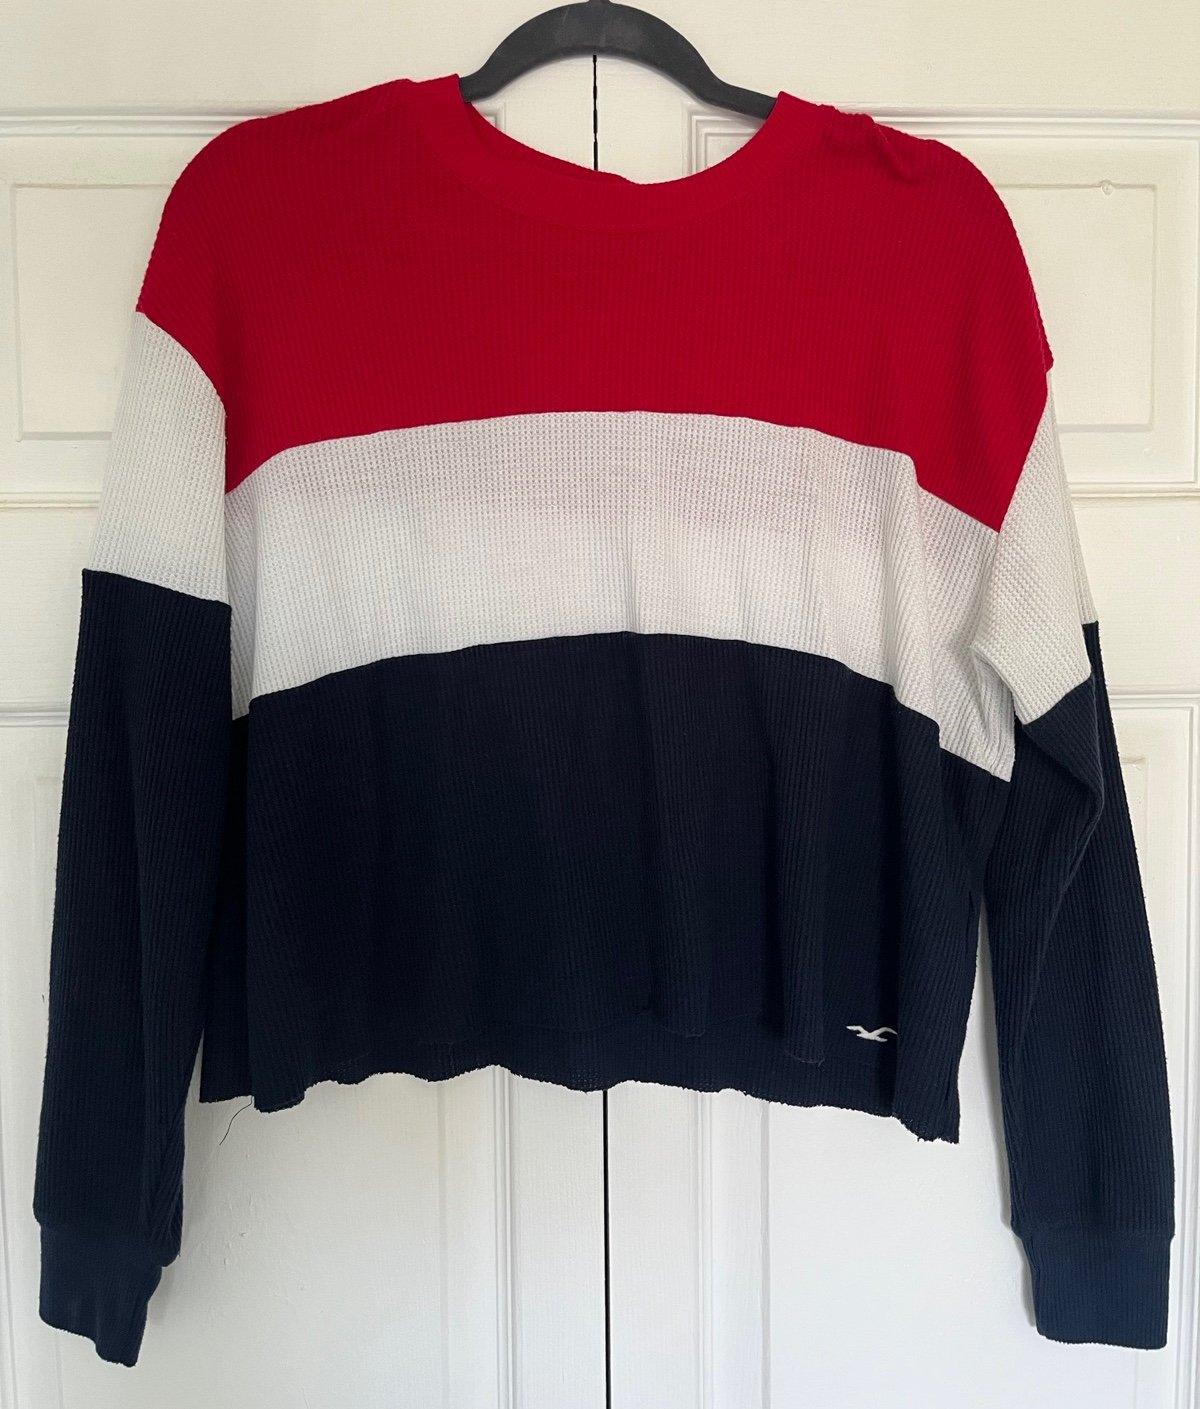 Wholesale price Hollister Sweater Cropped H3VrNJkEd Everyday Low Prices